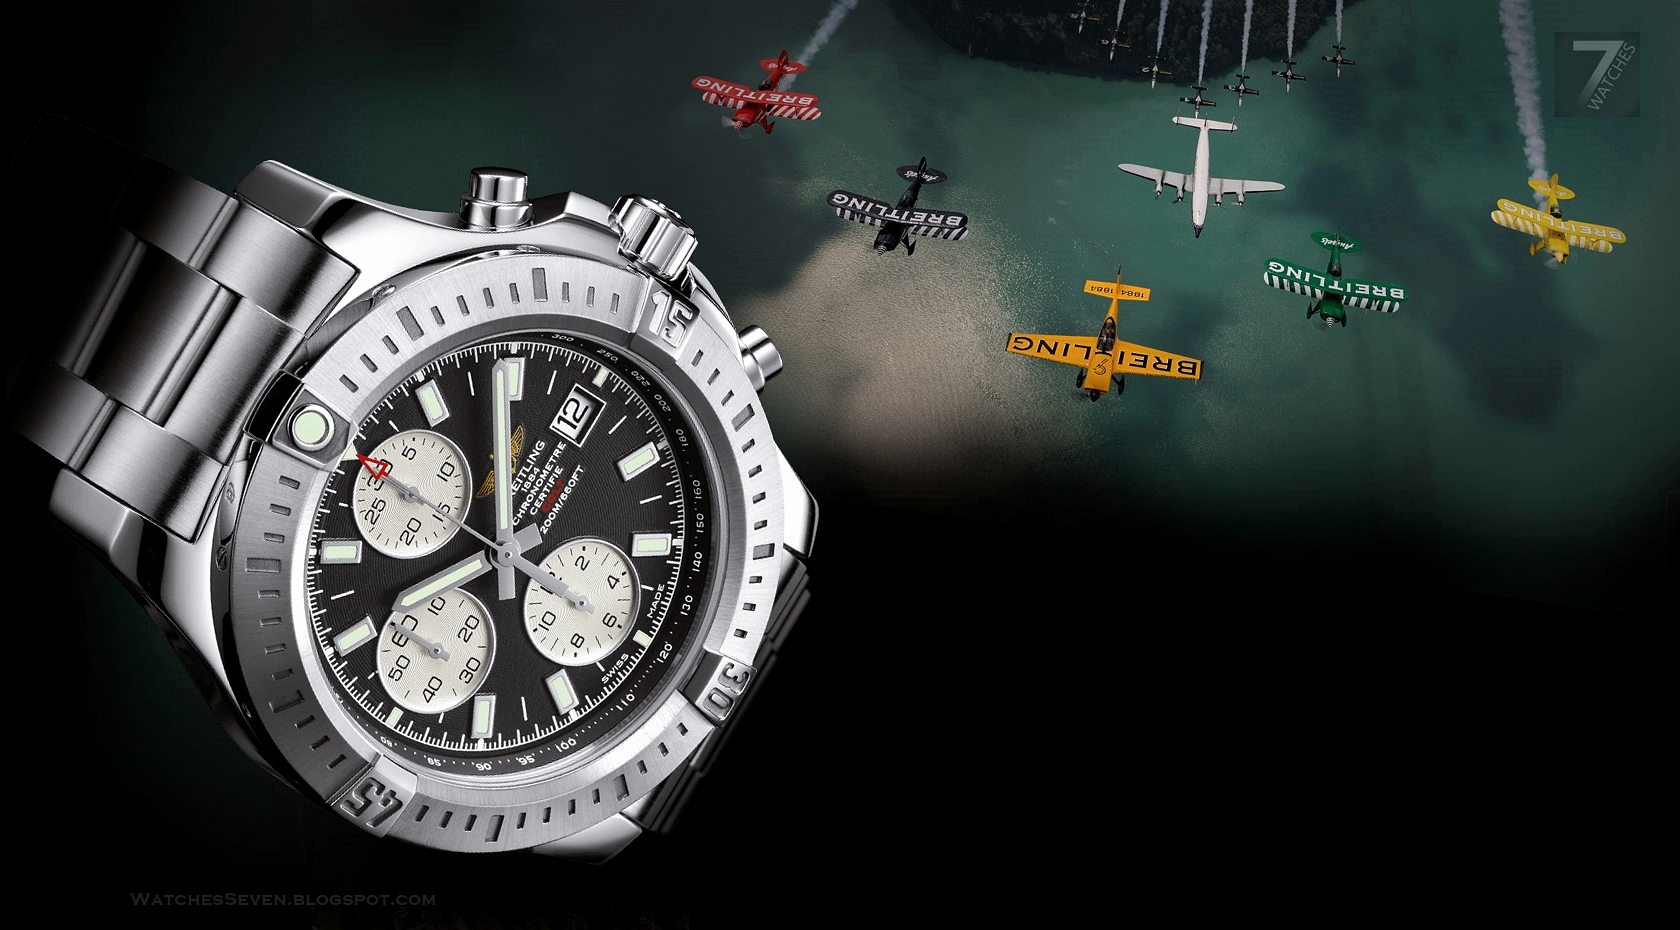 Watches 7: BREITLING – Colt Chronograph Automatic